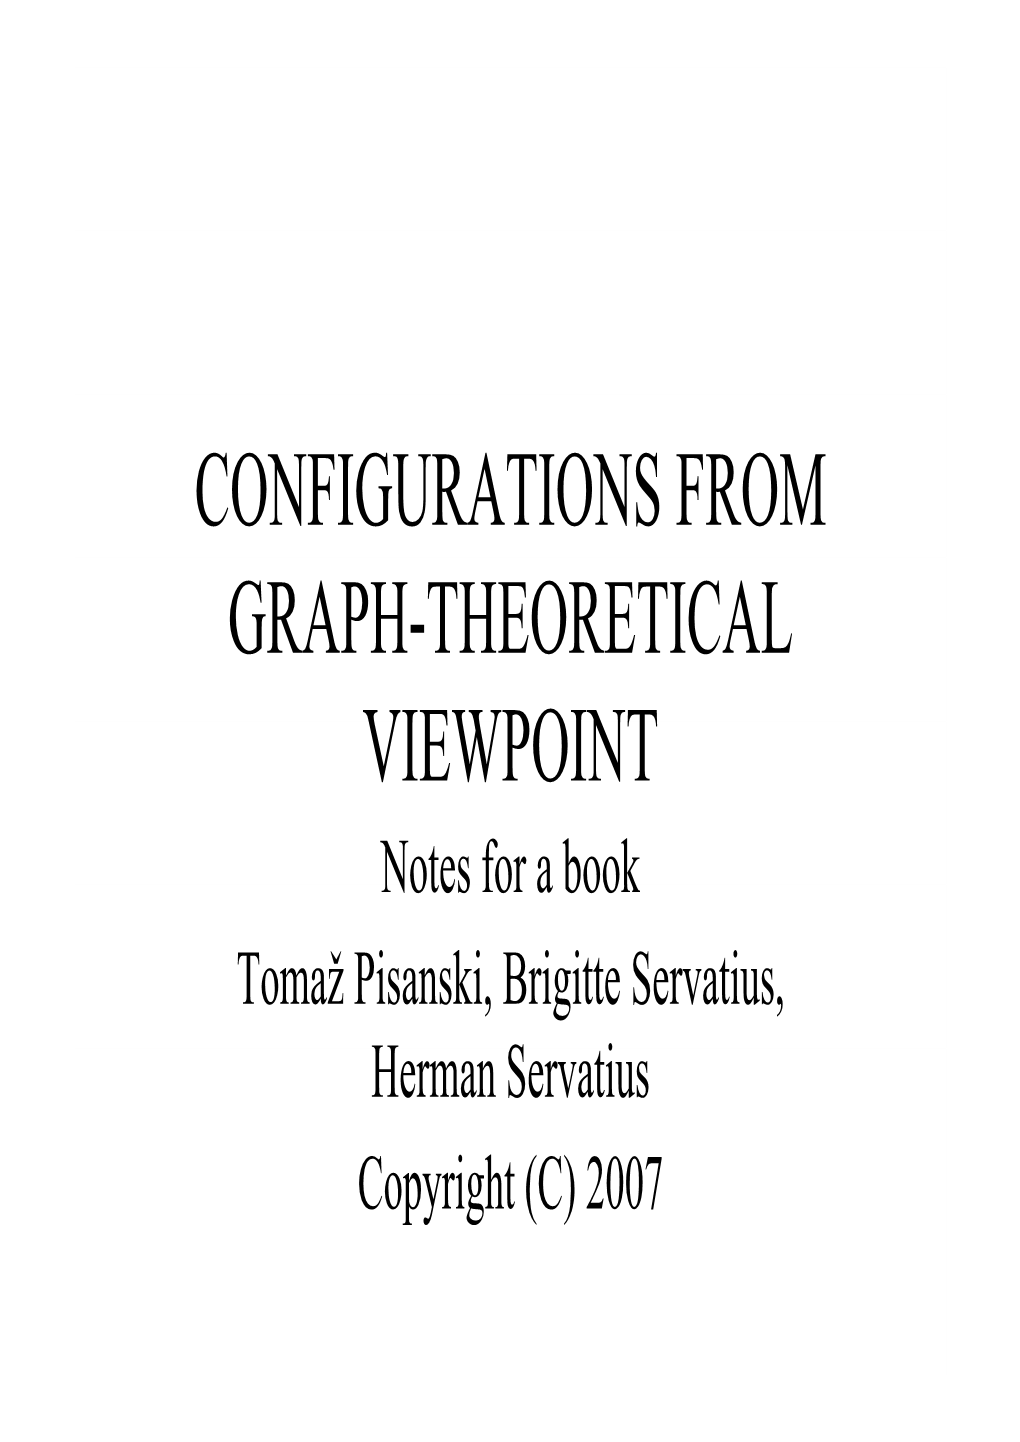 CONFIGURATIONS from GRAPH-THEORETICAL VIEWPOINT Notes for a Book Tomaž Pisanski, Brigitte Servatius, Hsiherman Servatius Copyri Ght (C ) 2007 CONTENTS